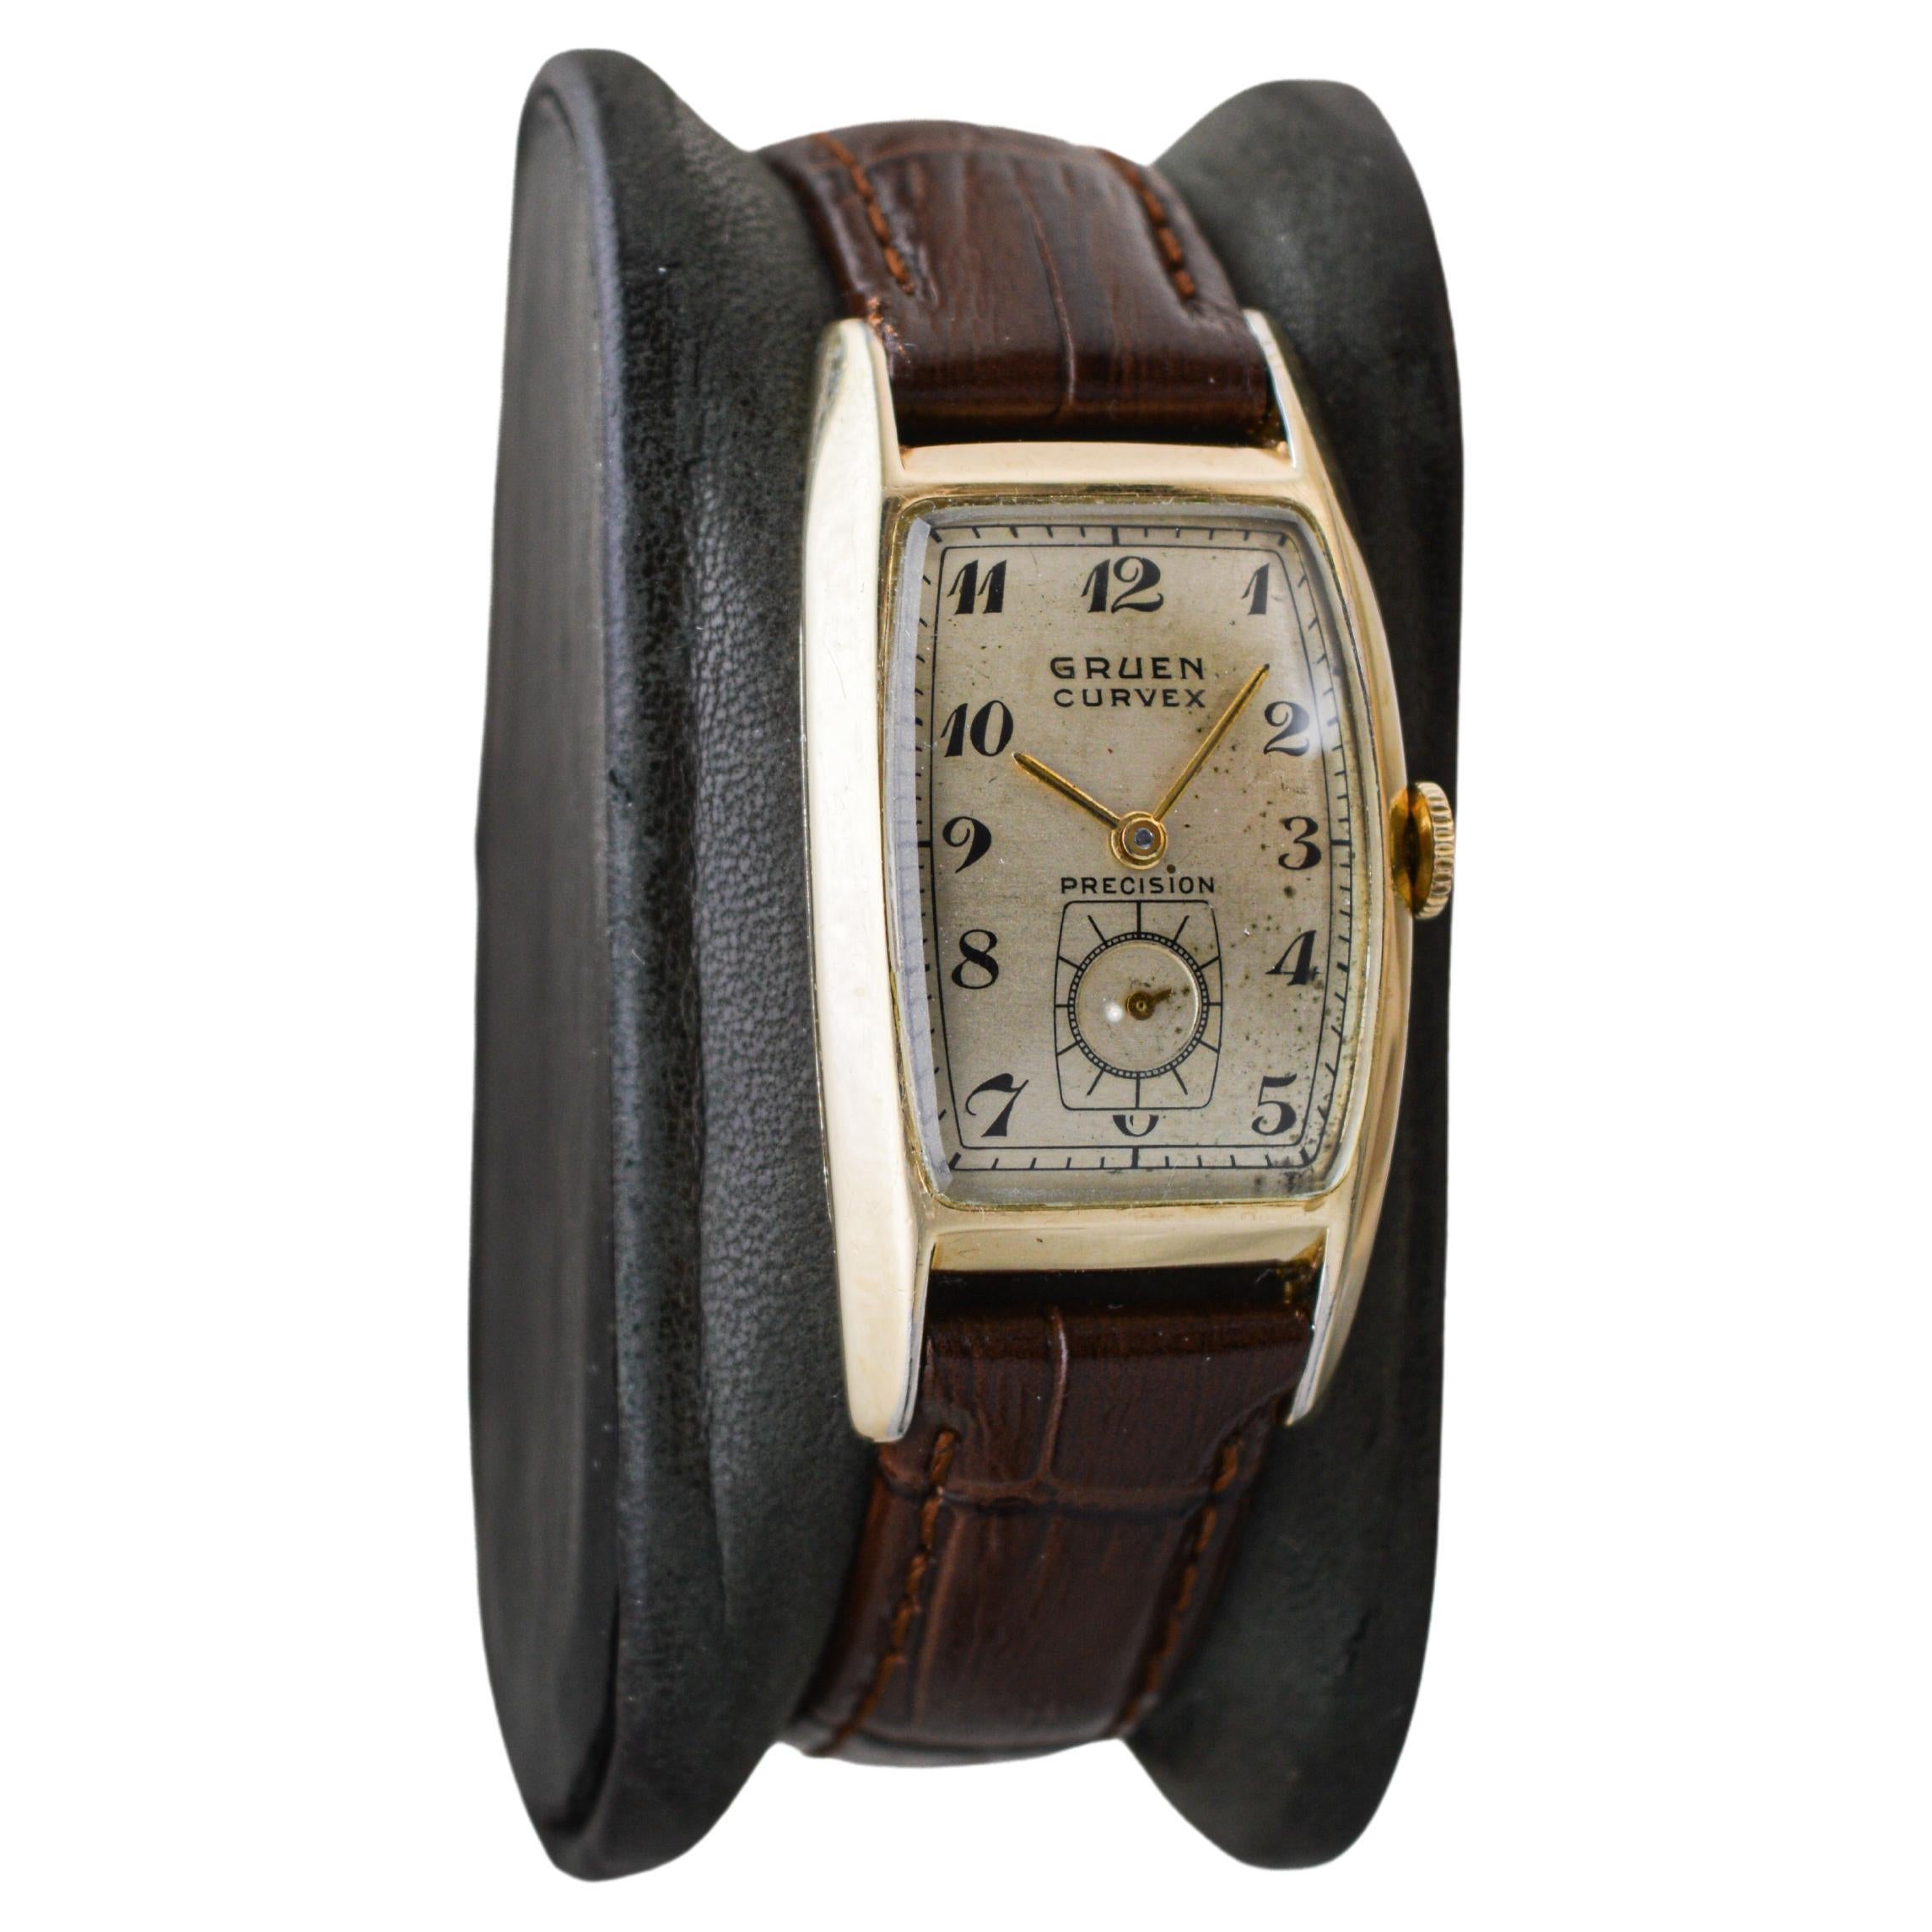 FACTORY / HOUSE: Gruen Watch Company
STYLE / REFERENCE: Art Deco / Curvex
METAL / MATERIAL: Yellow Gold Filled
CIRCA / YEAR: 1940's
DIMENSIONS / SIZE: Length 40mm X Width 22mm
MOVEMENT / CALIBER: Manual Winding / 17 Jewels / Caliber  440
DIAL /